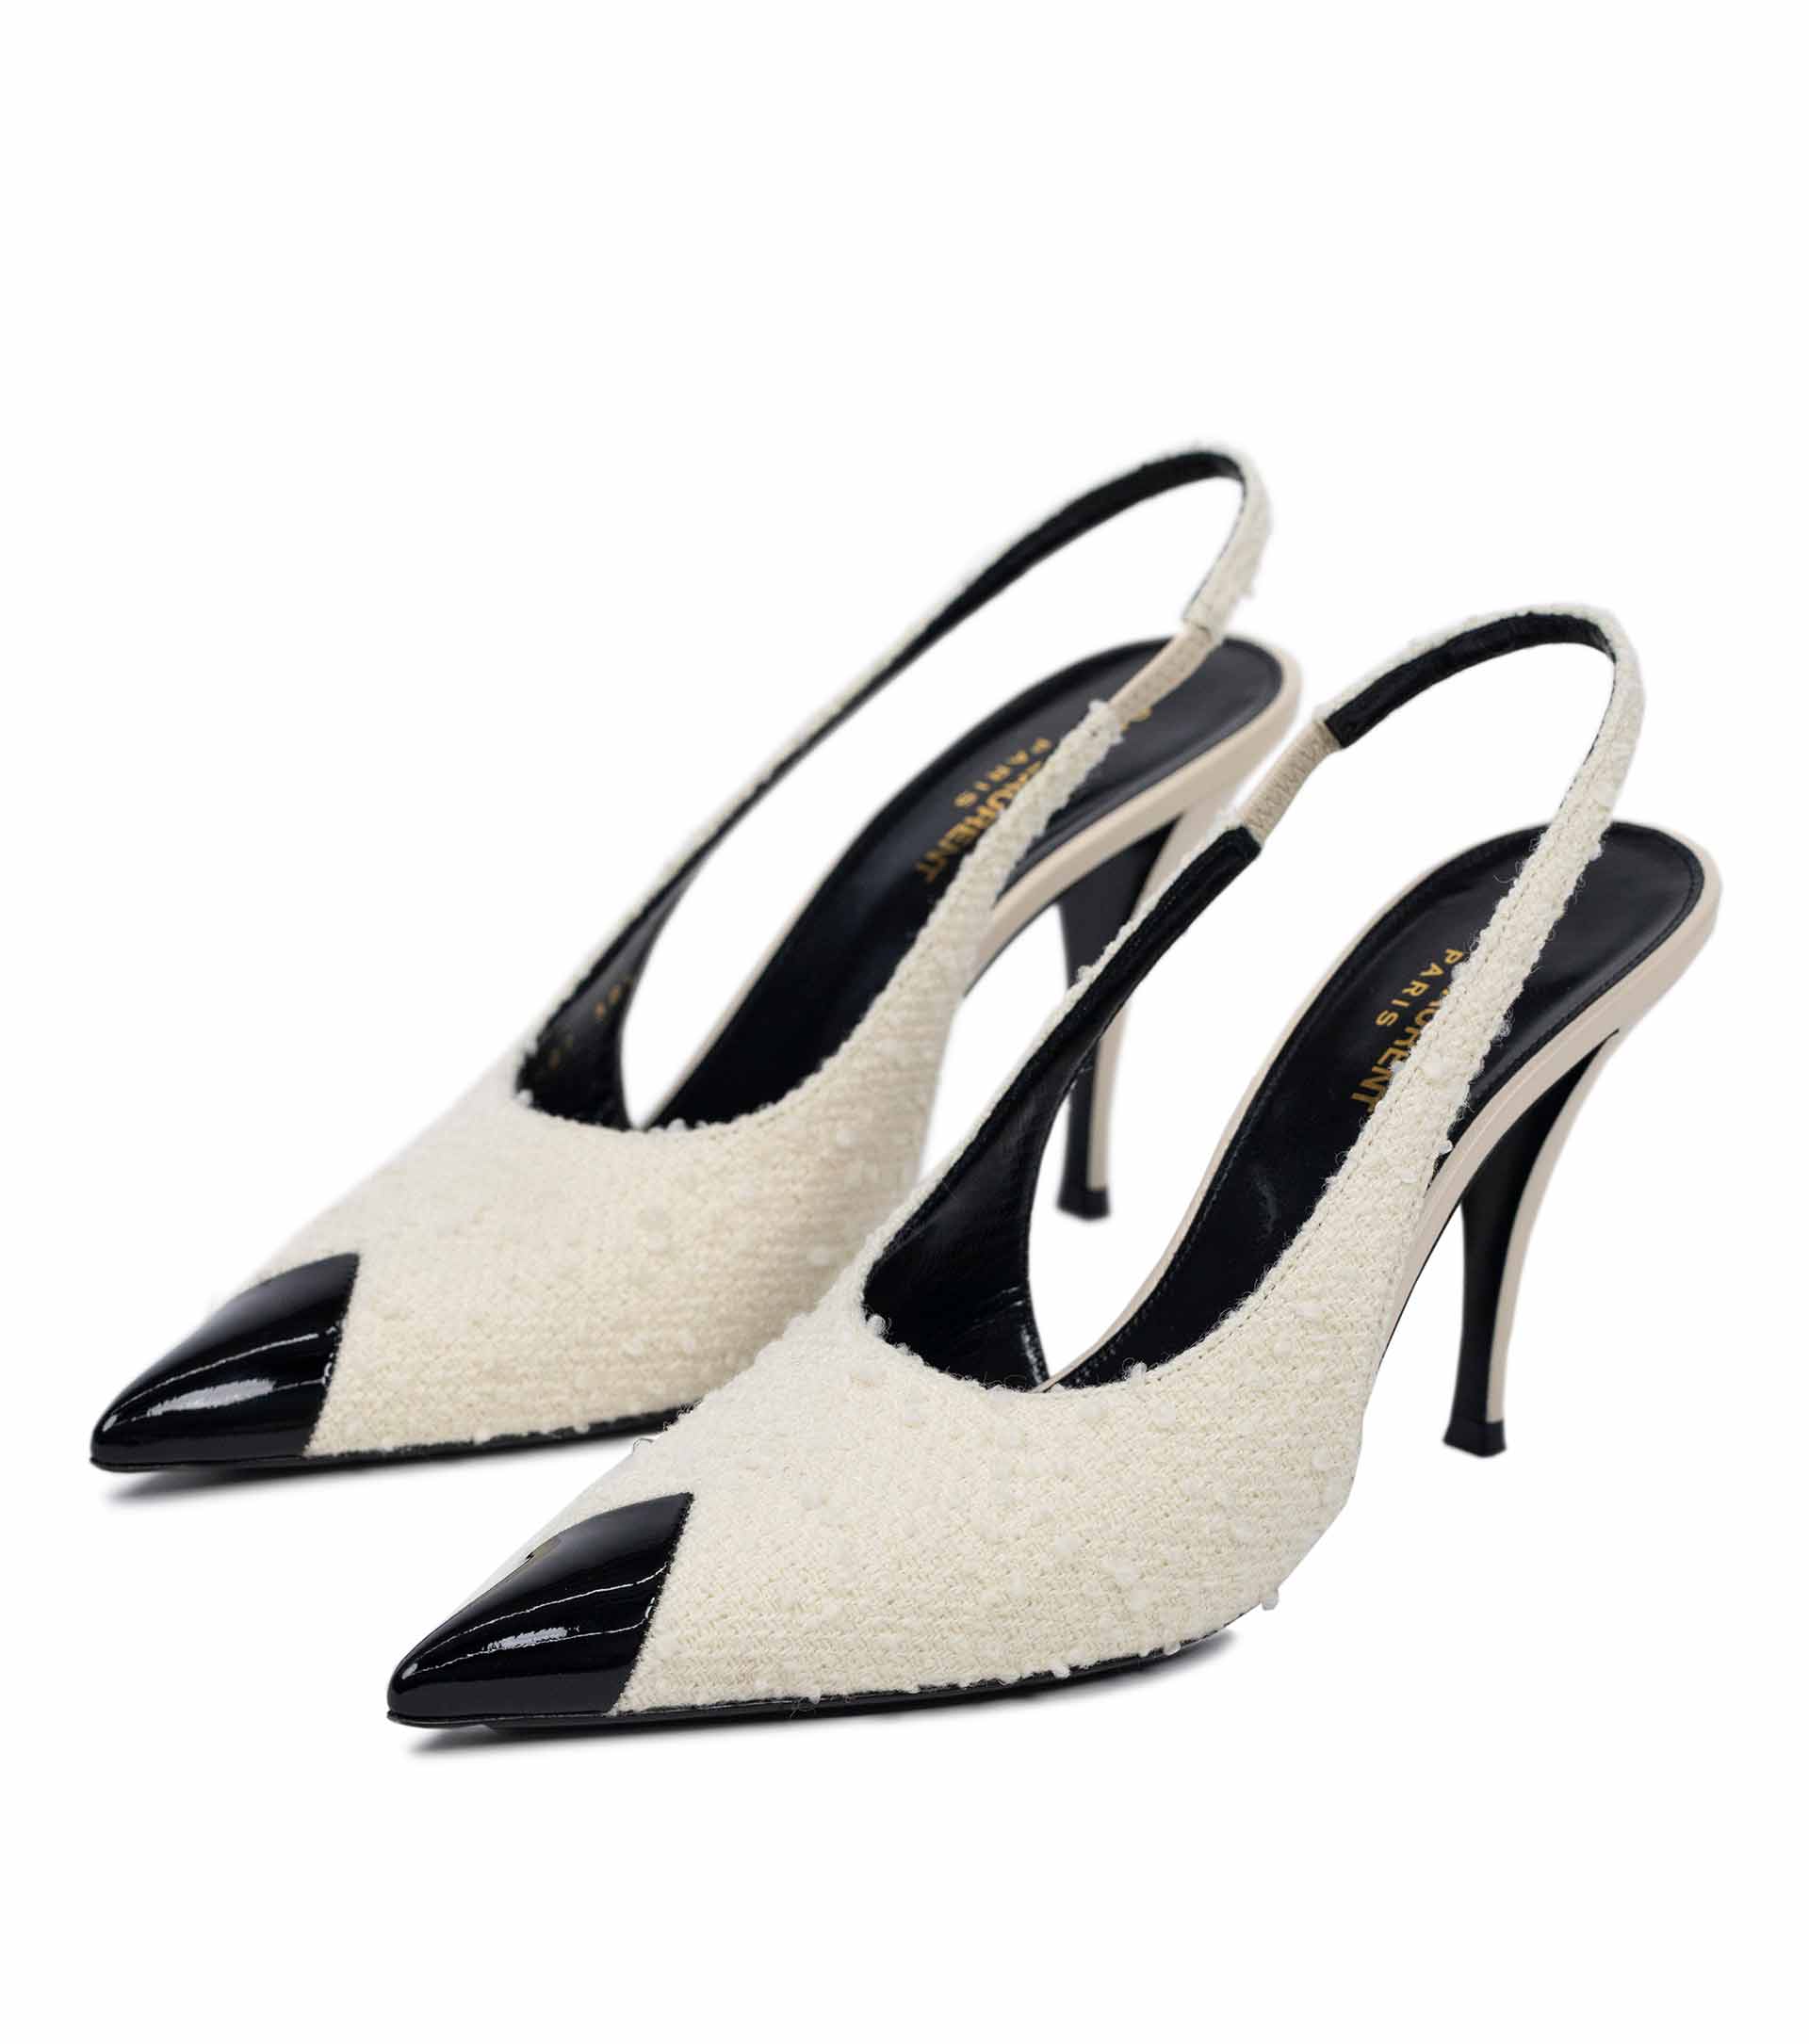 Vesper Slingback Pumps in Boucle and Patent